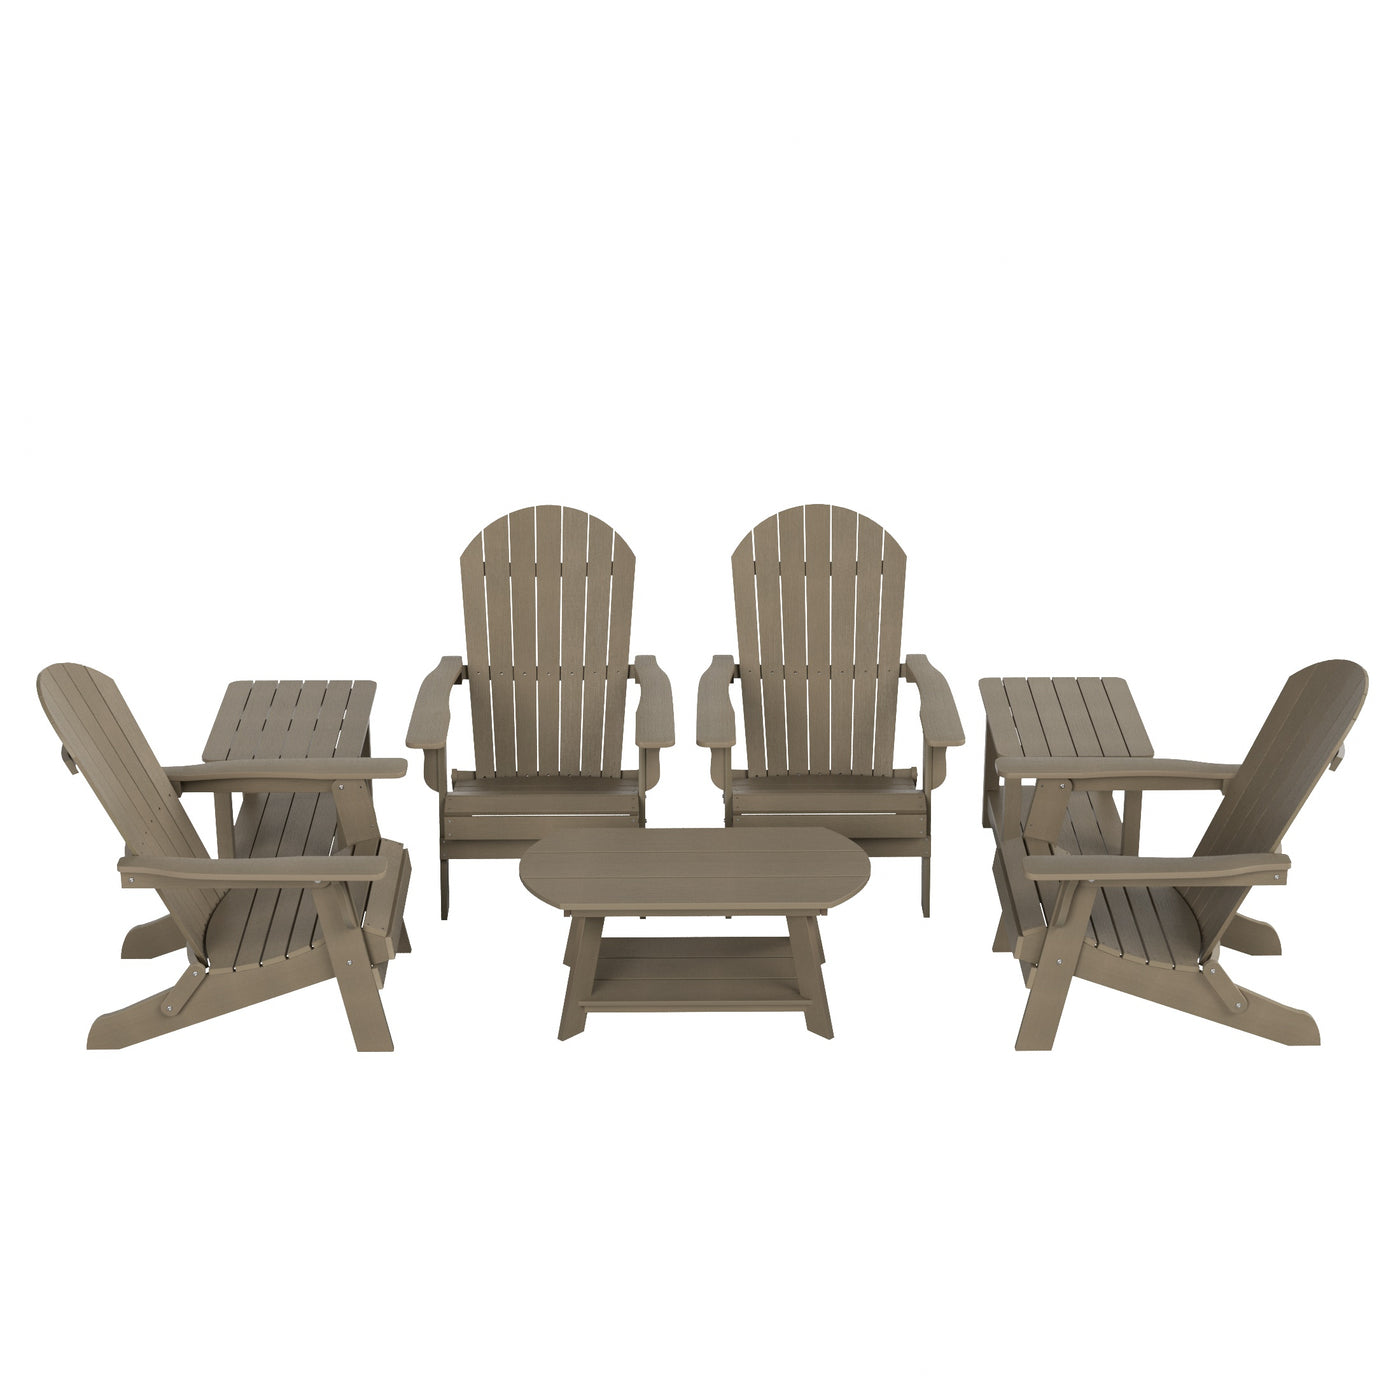 Tuscany HIPS 7-Piece Outdoor Folding Adirondack Chair With Coffee Table and Side Table Set